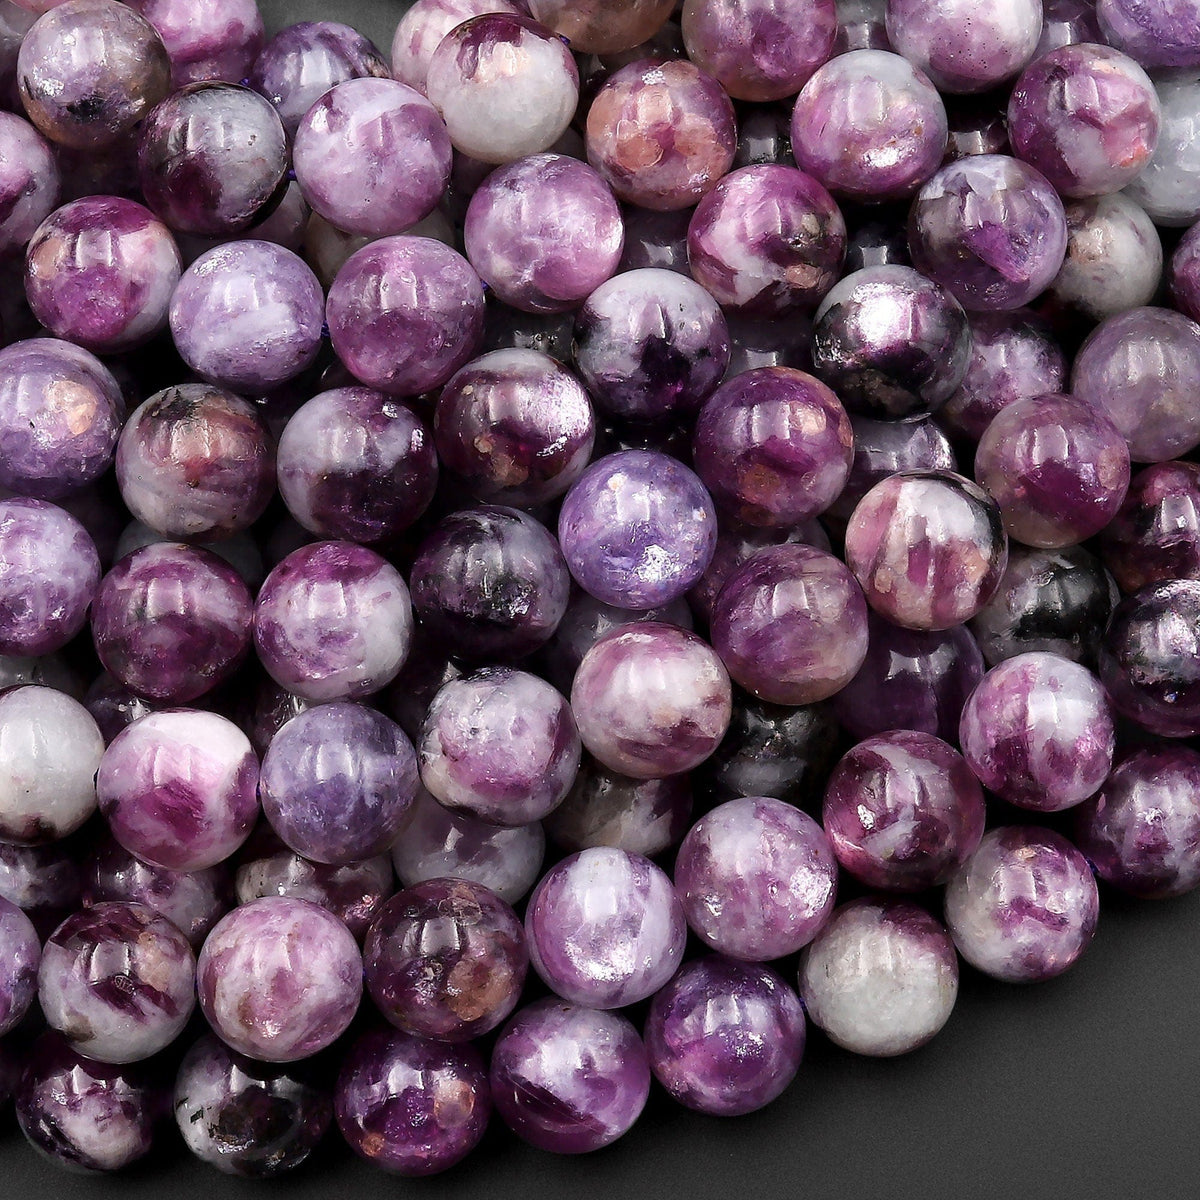 40 10mm Round Beads Purple, Green, and Gold